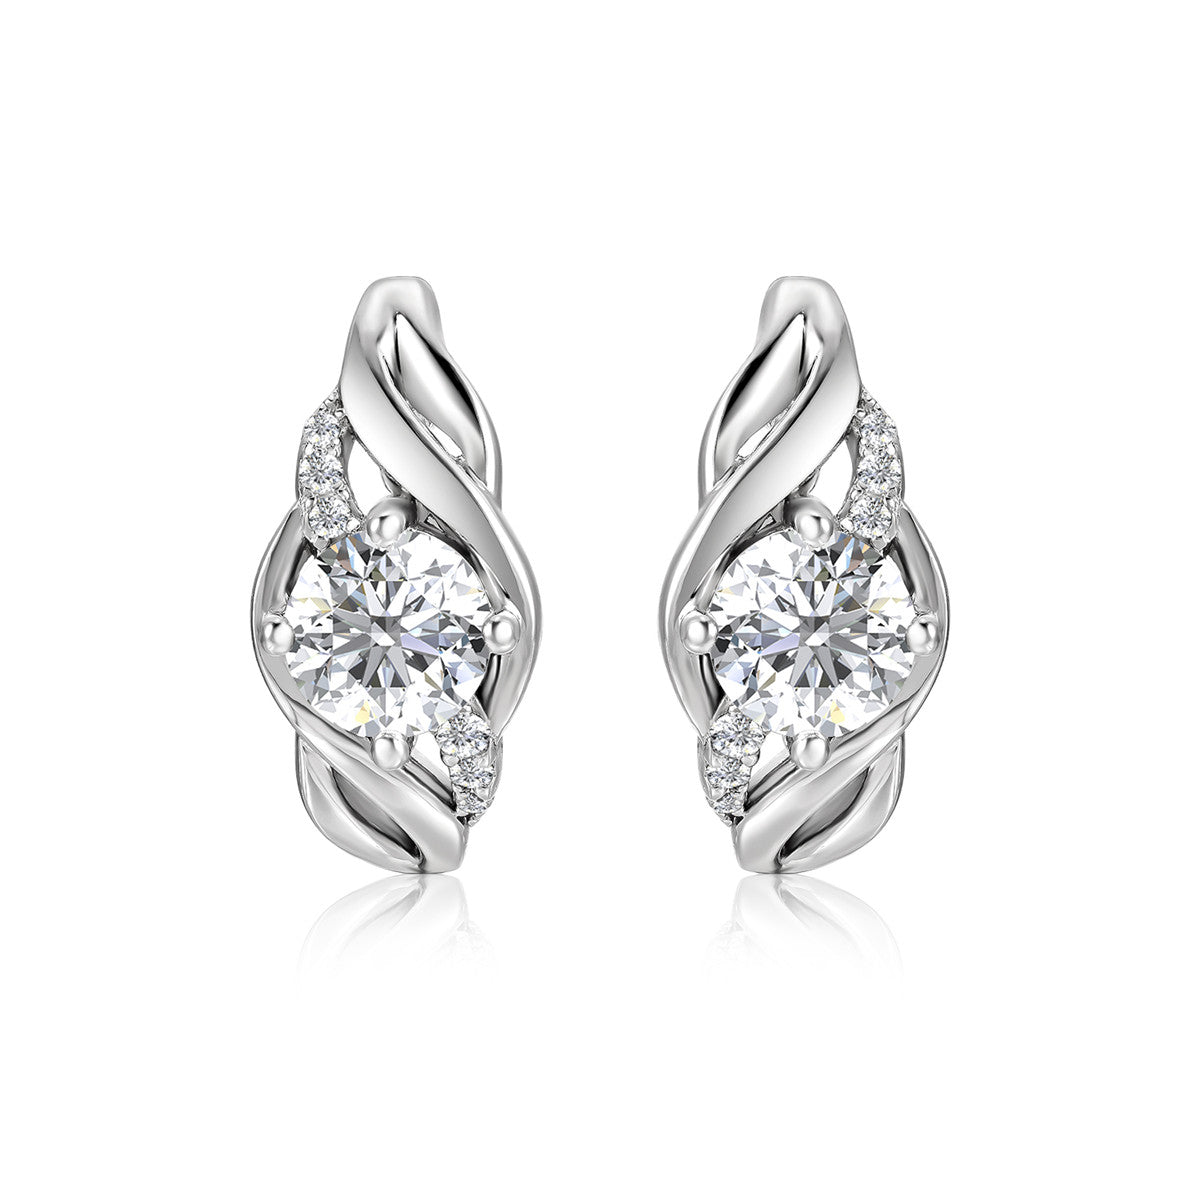 Moissanite by Cate & Chloe Evelyn Sterling Silver Drop Earrings with Moissanite and 5A Cubic Zirconia Crystals